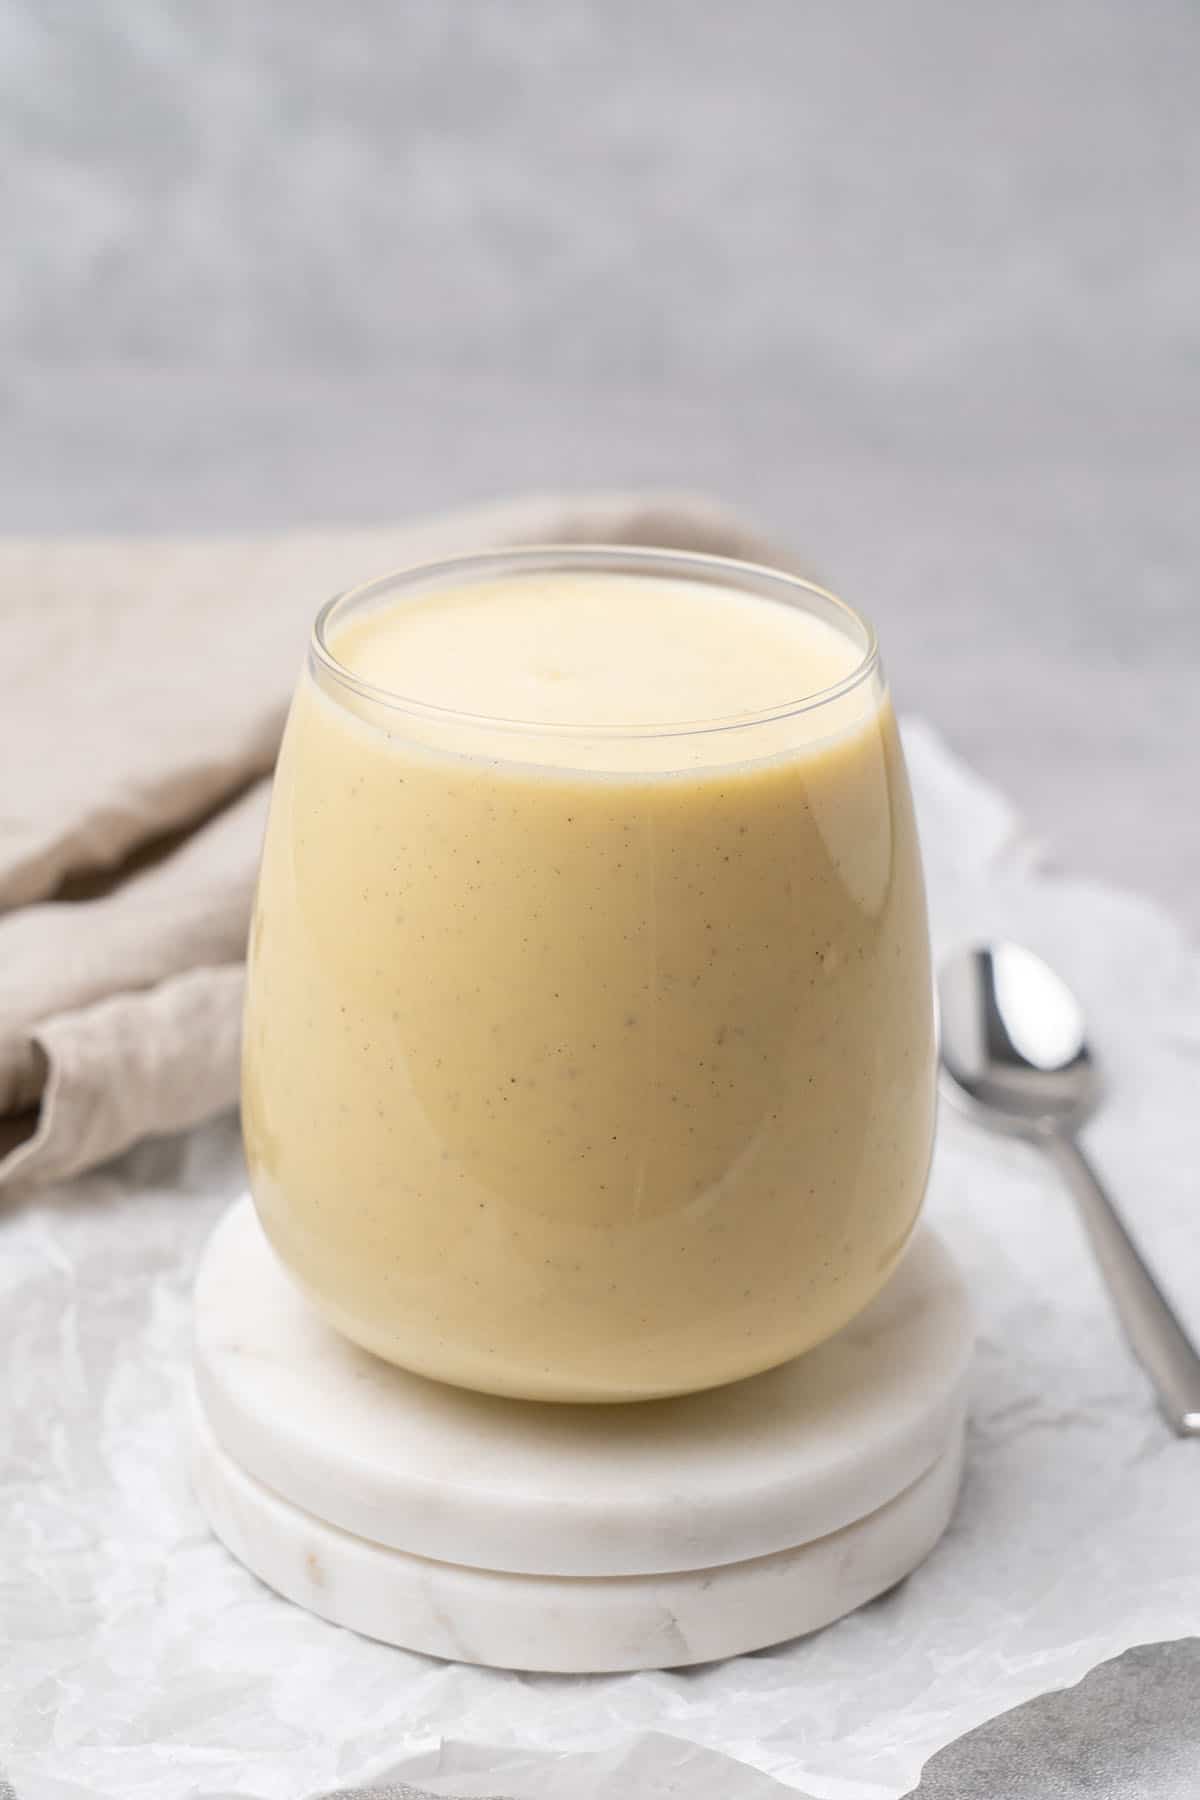 Creme anglaise in a glass.